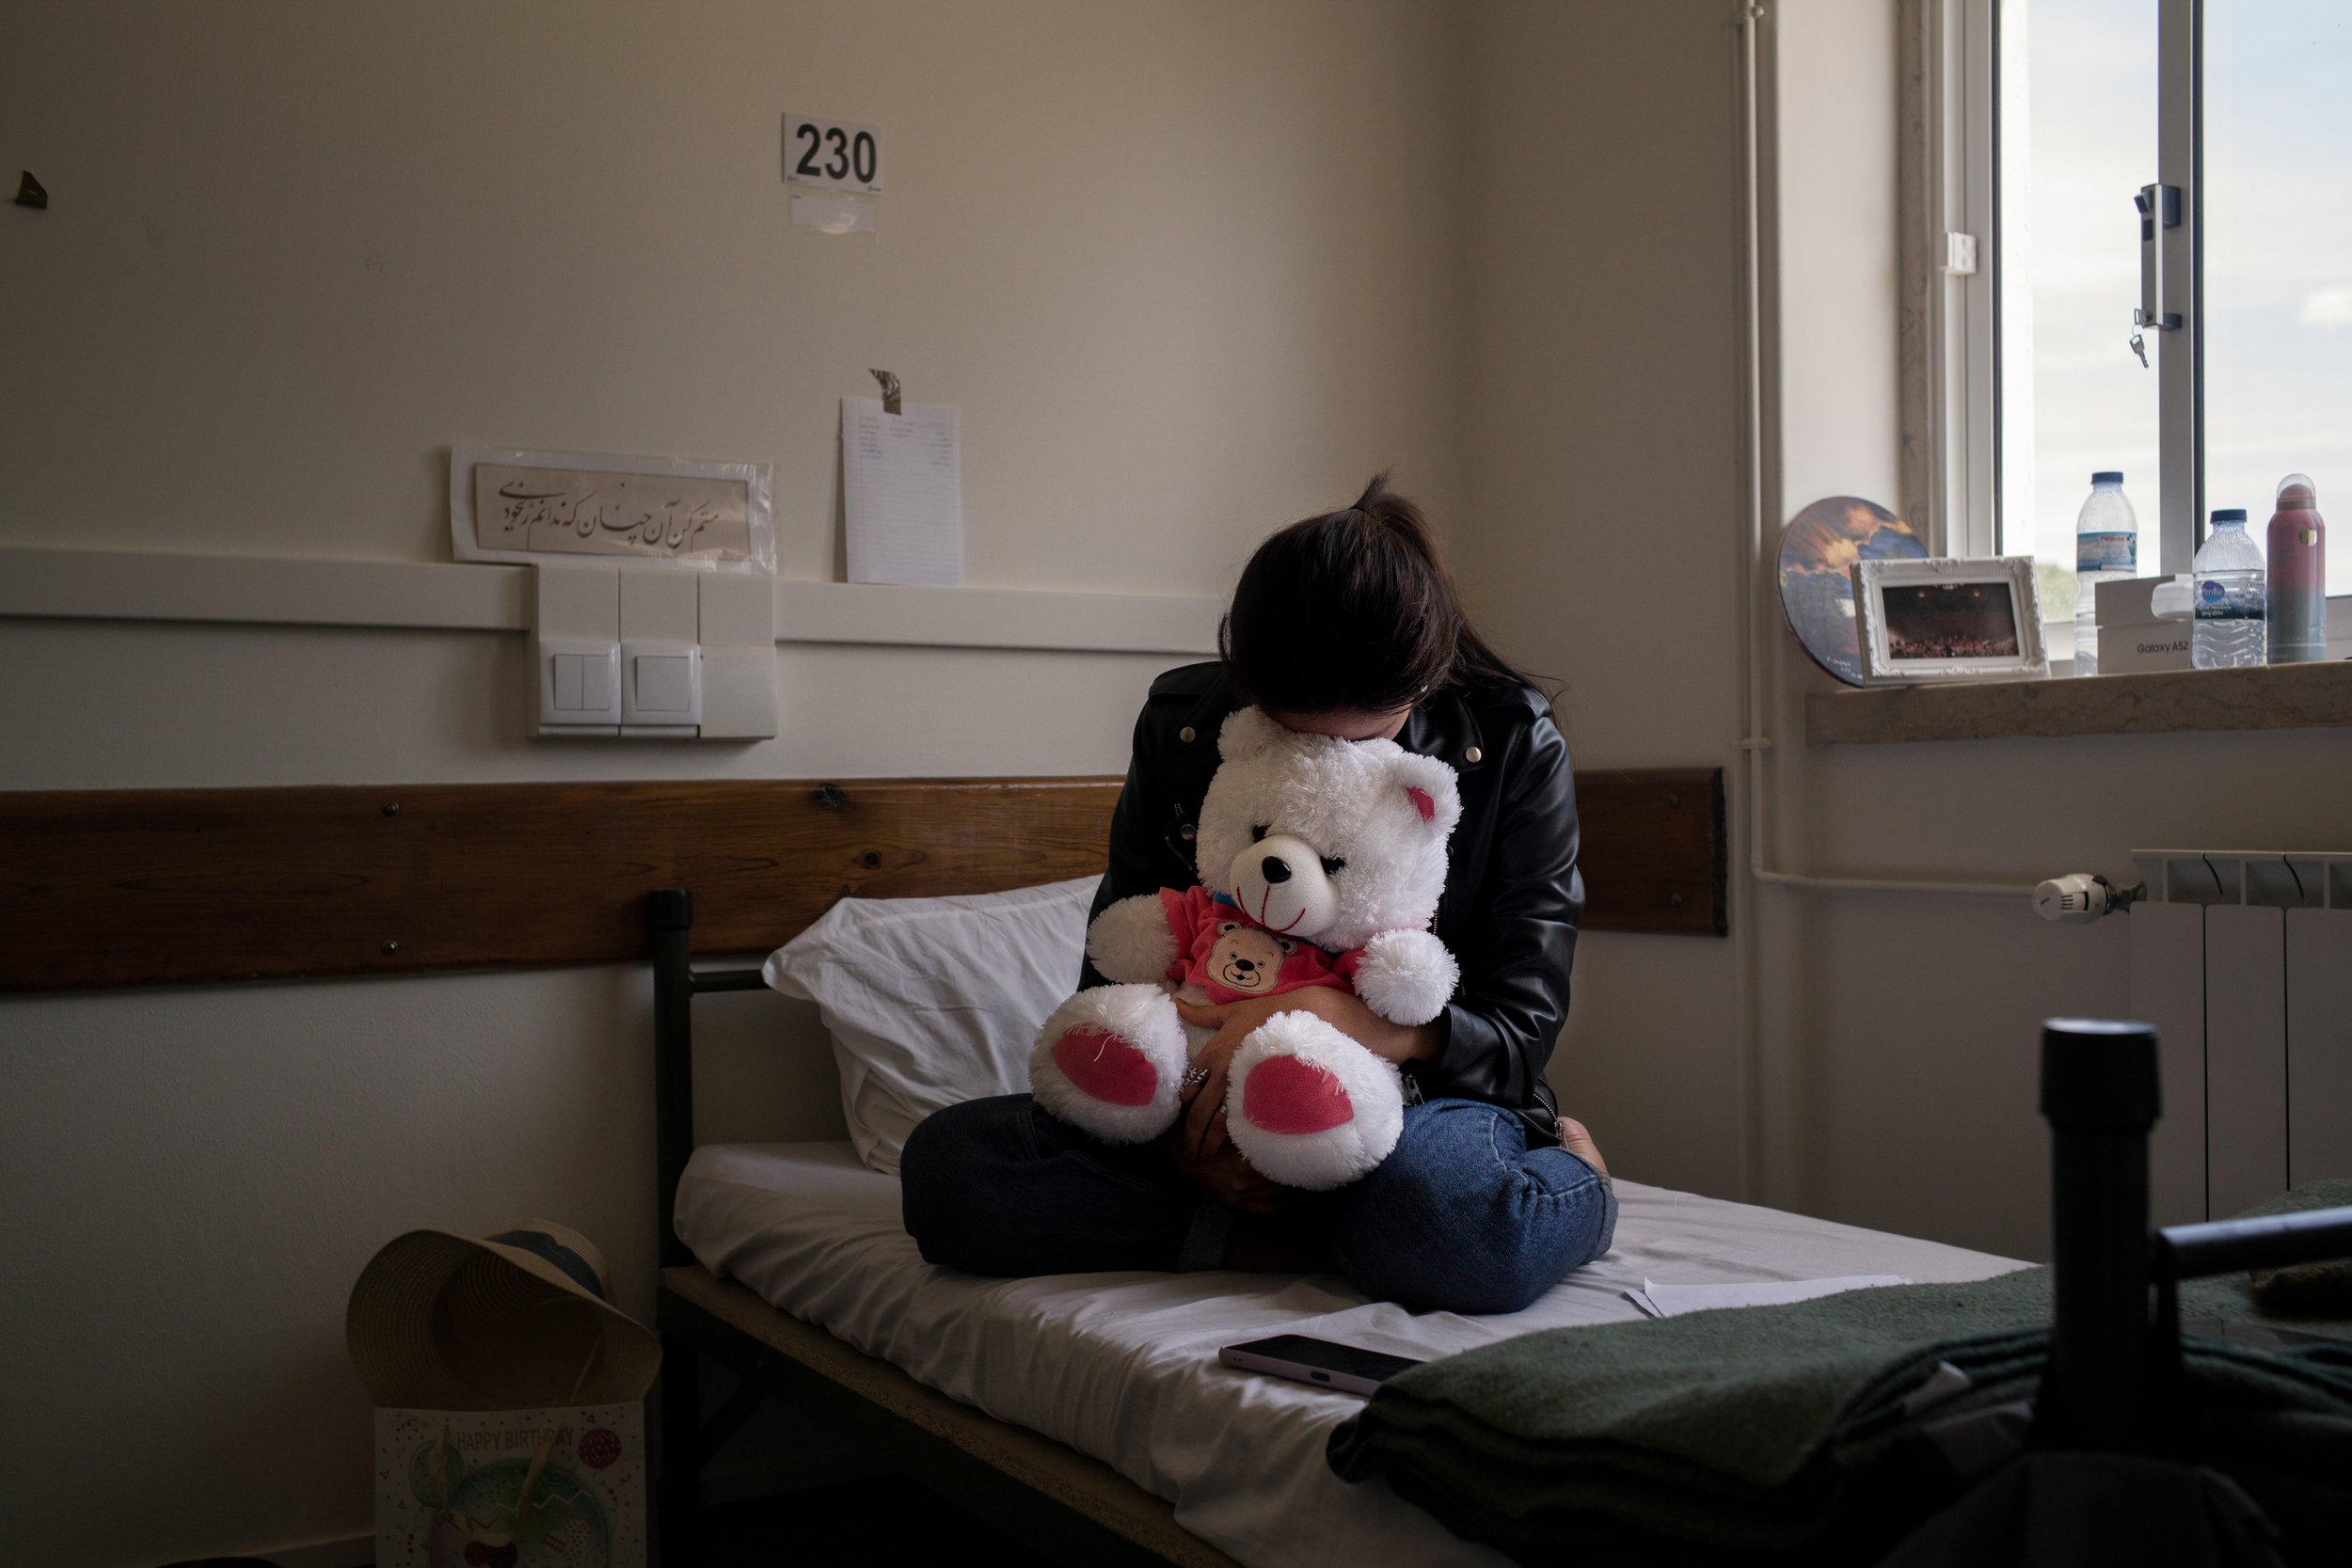  Shogufa Safi, 18, hugs a teddy bear at the former military Hospital of Ajuda, Lisbon, Portugal, where a group of about 100 Afghan refugees has been living since December. June 2022 